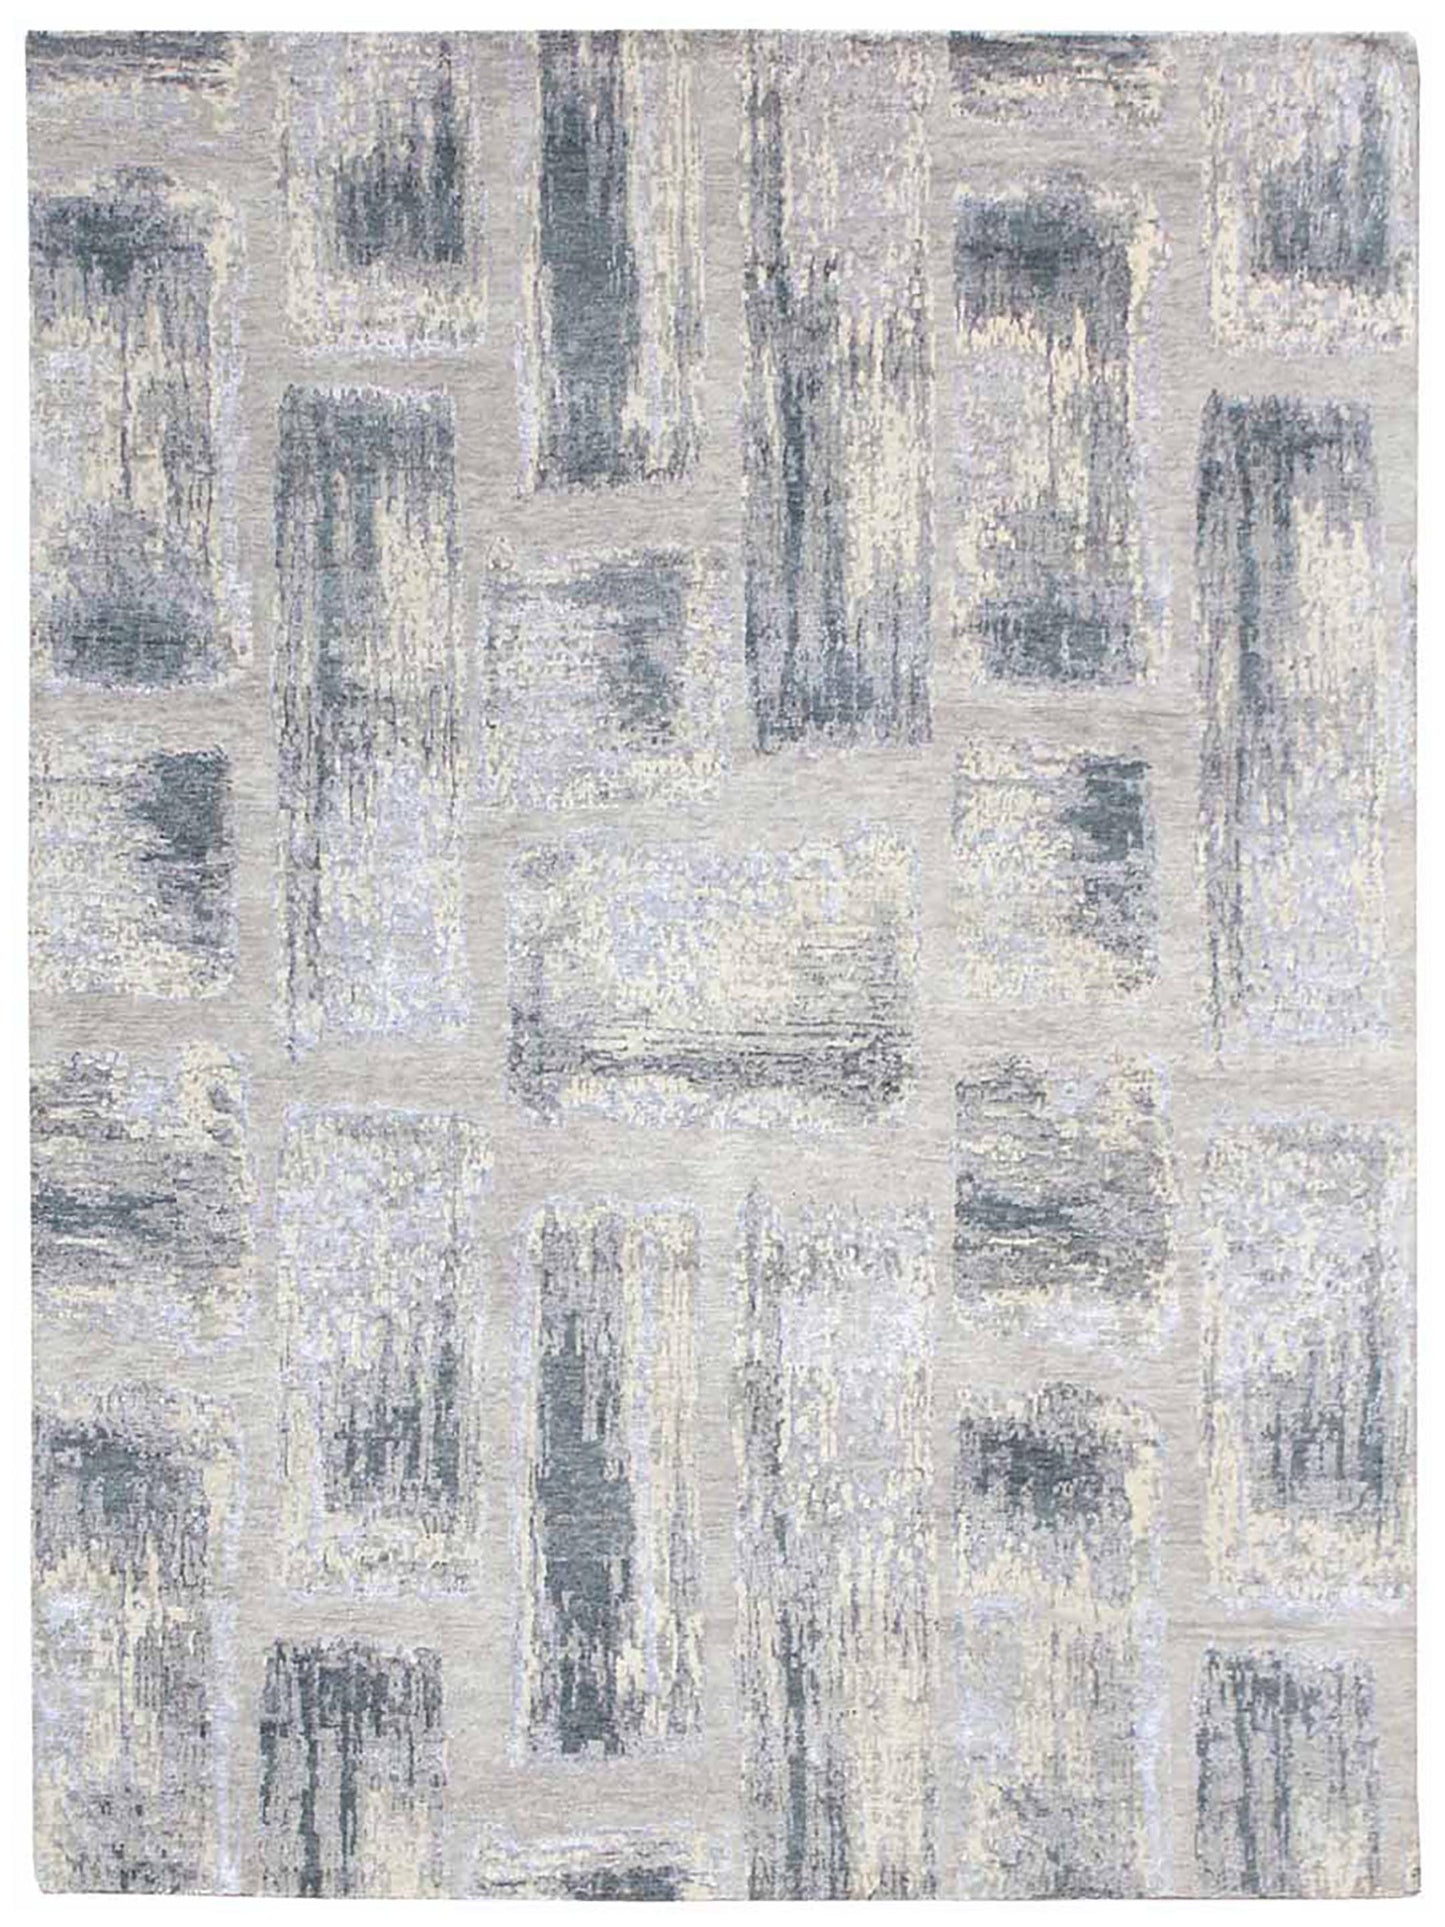 Limited SYDNEY SD-541 LIGHT GRAY Transitional Knotted Rug